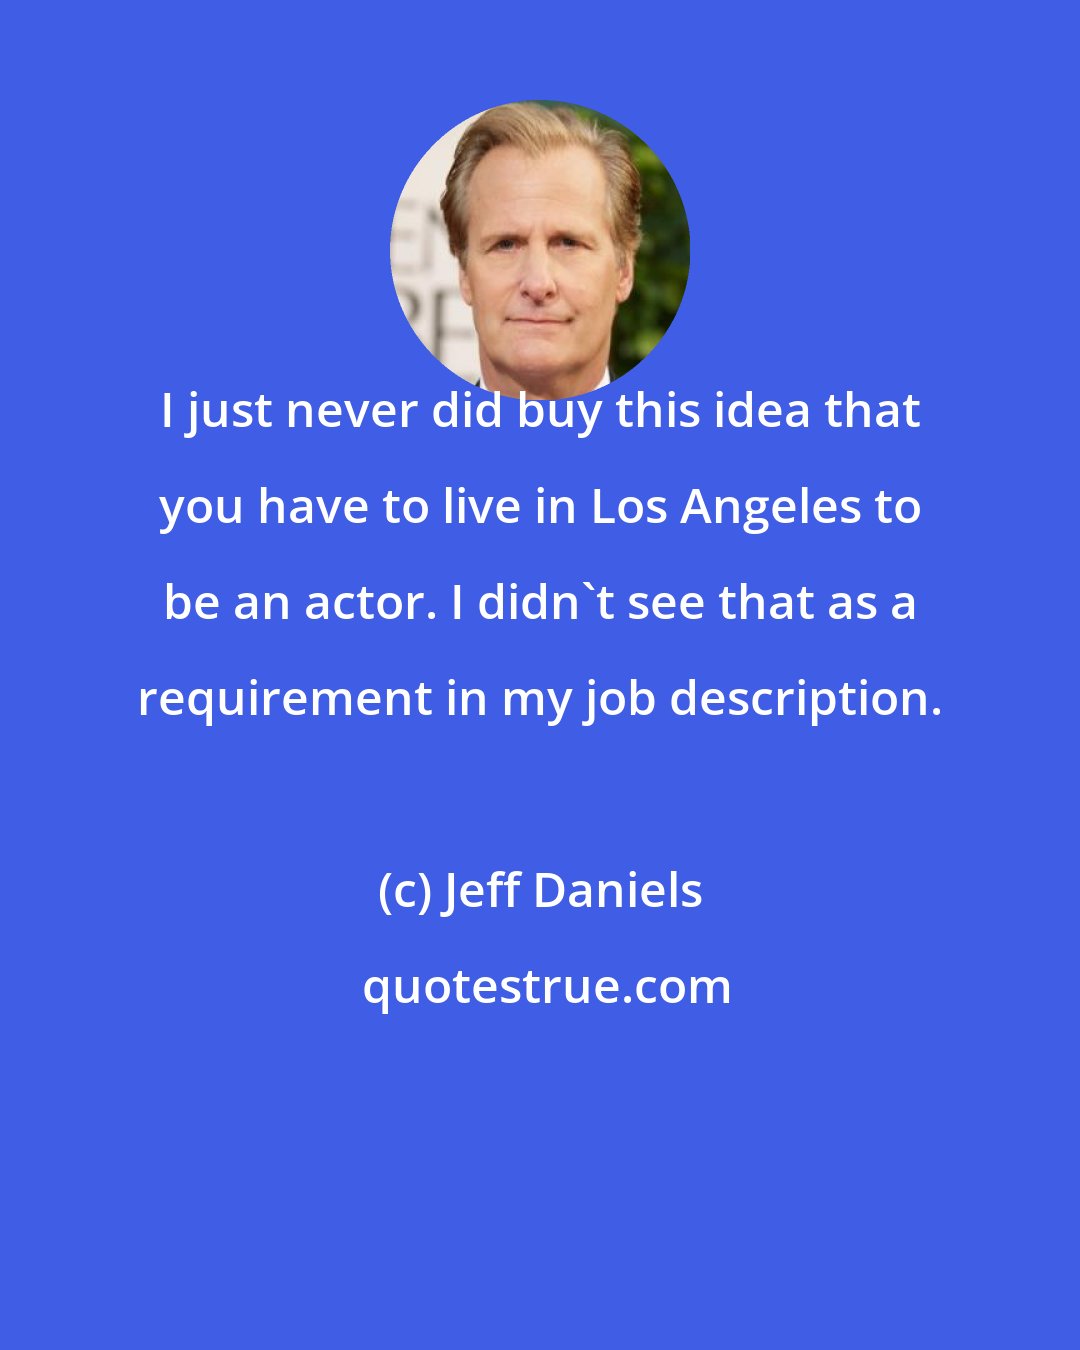 Jeff Daniels: I just never did buy this idea that you have to live in Los Angeles to be an actor. I didn't see that as a requirement in my job description.